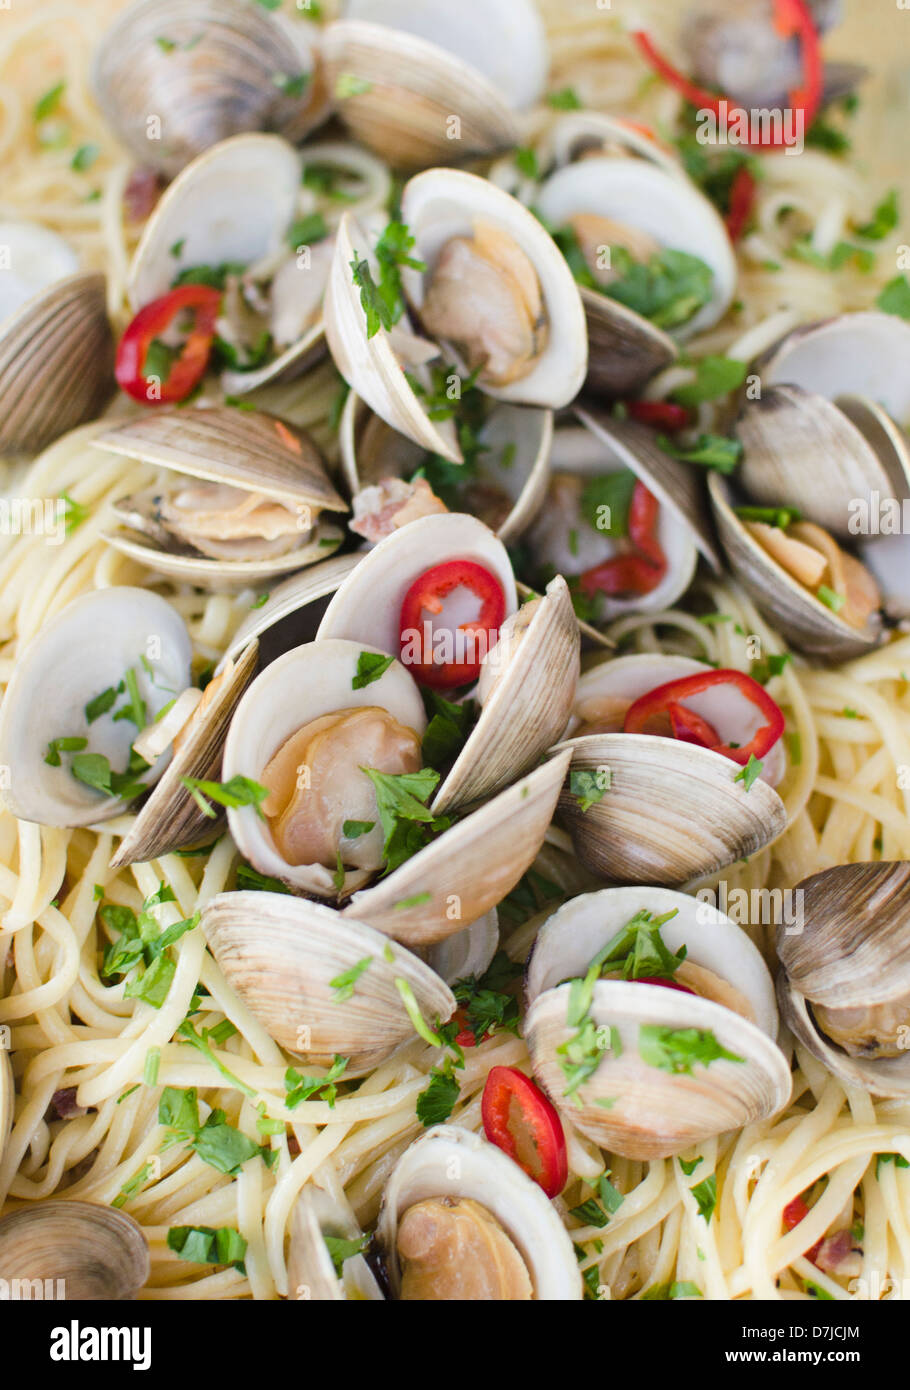 Pasta dish with mussels Stock Photo